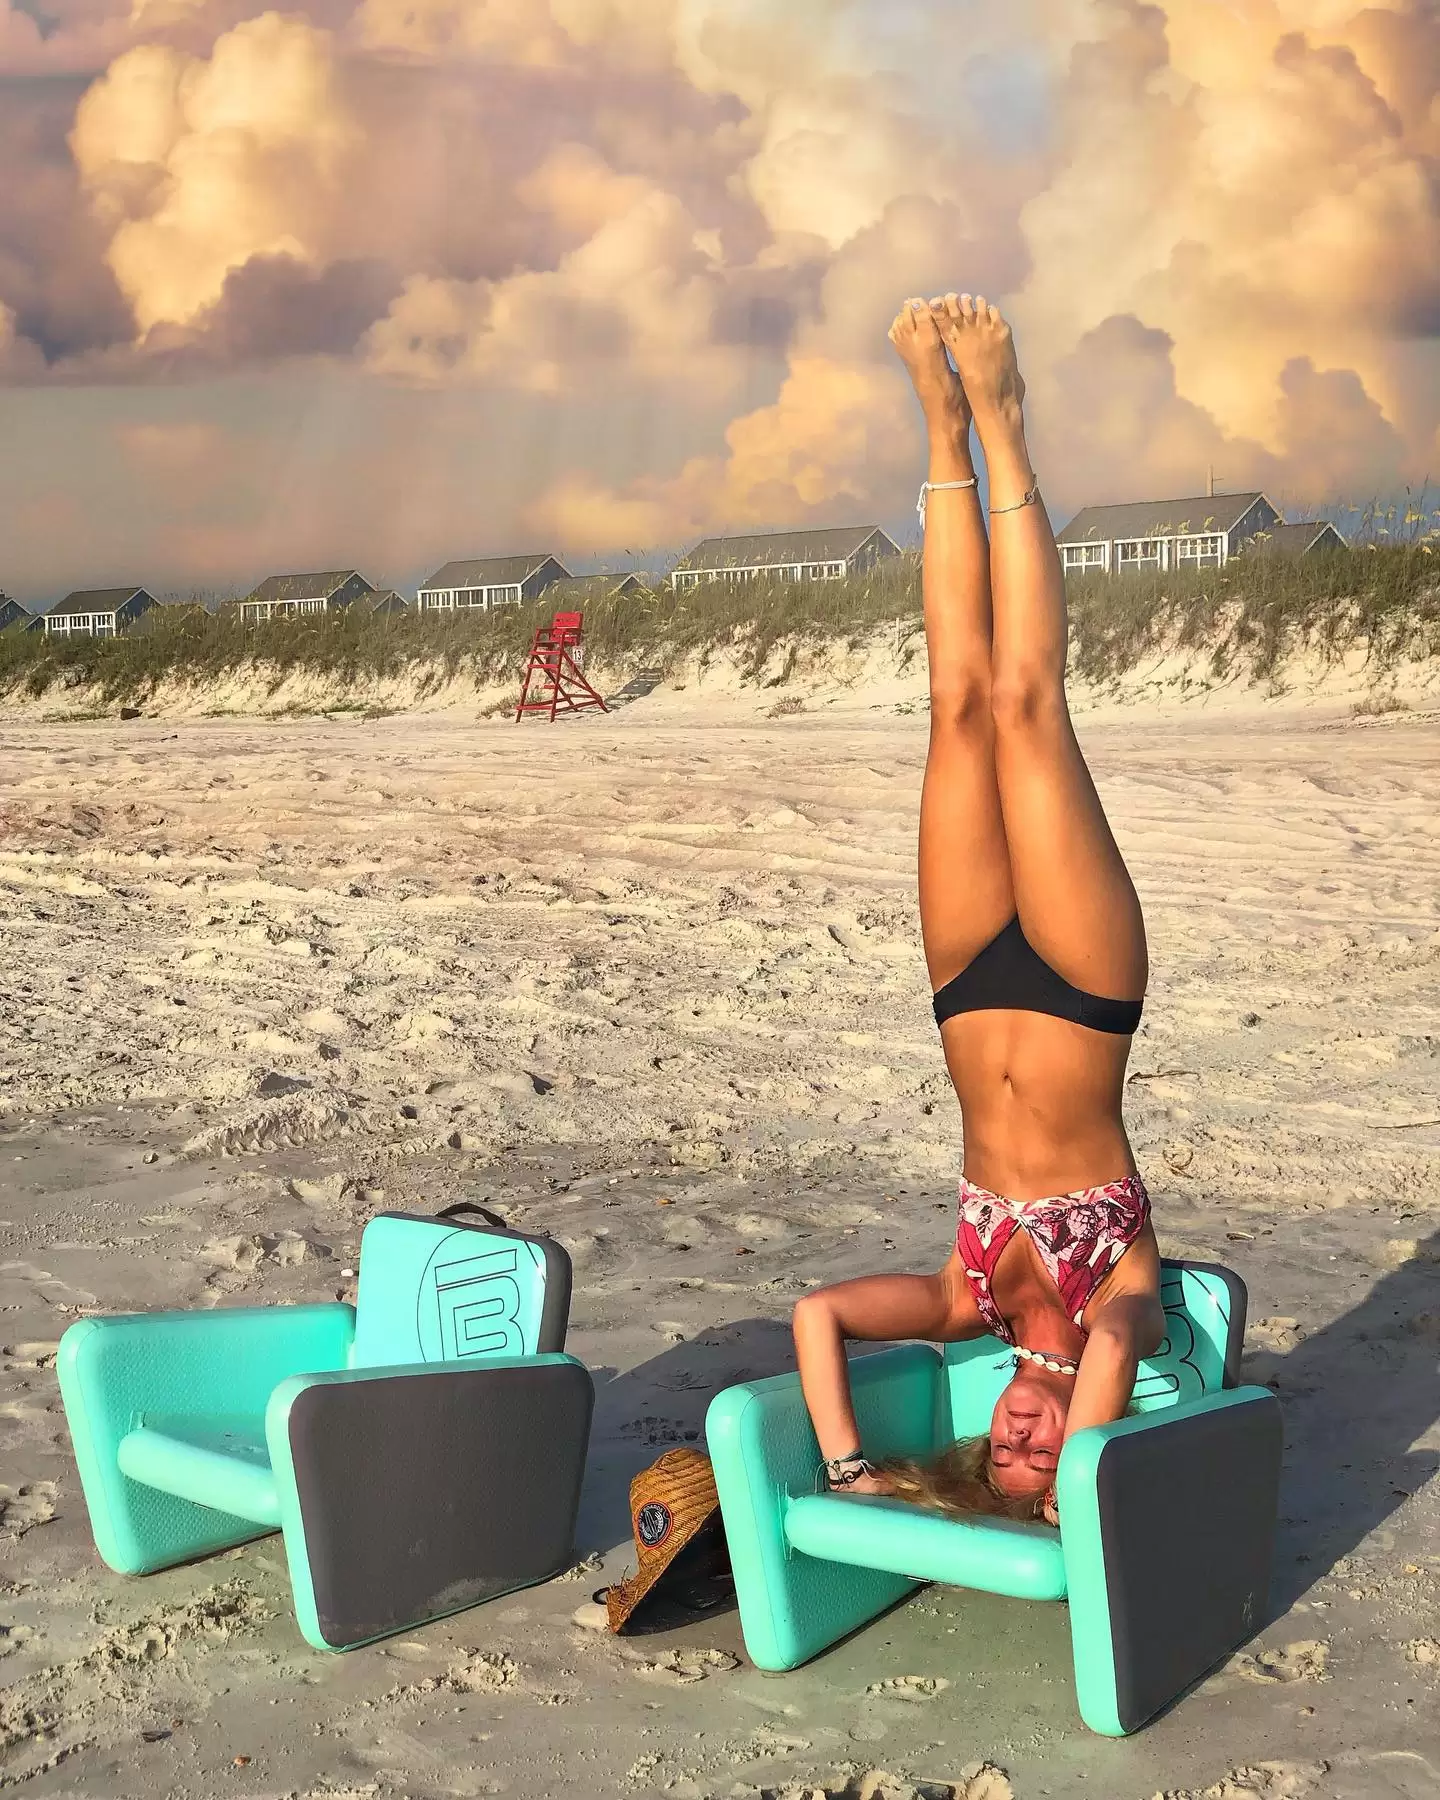 BOTE Aero Chair on the beach with a girl doing a headstand on it.